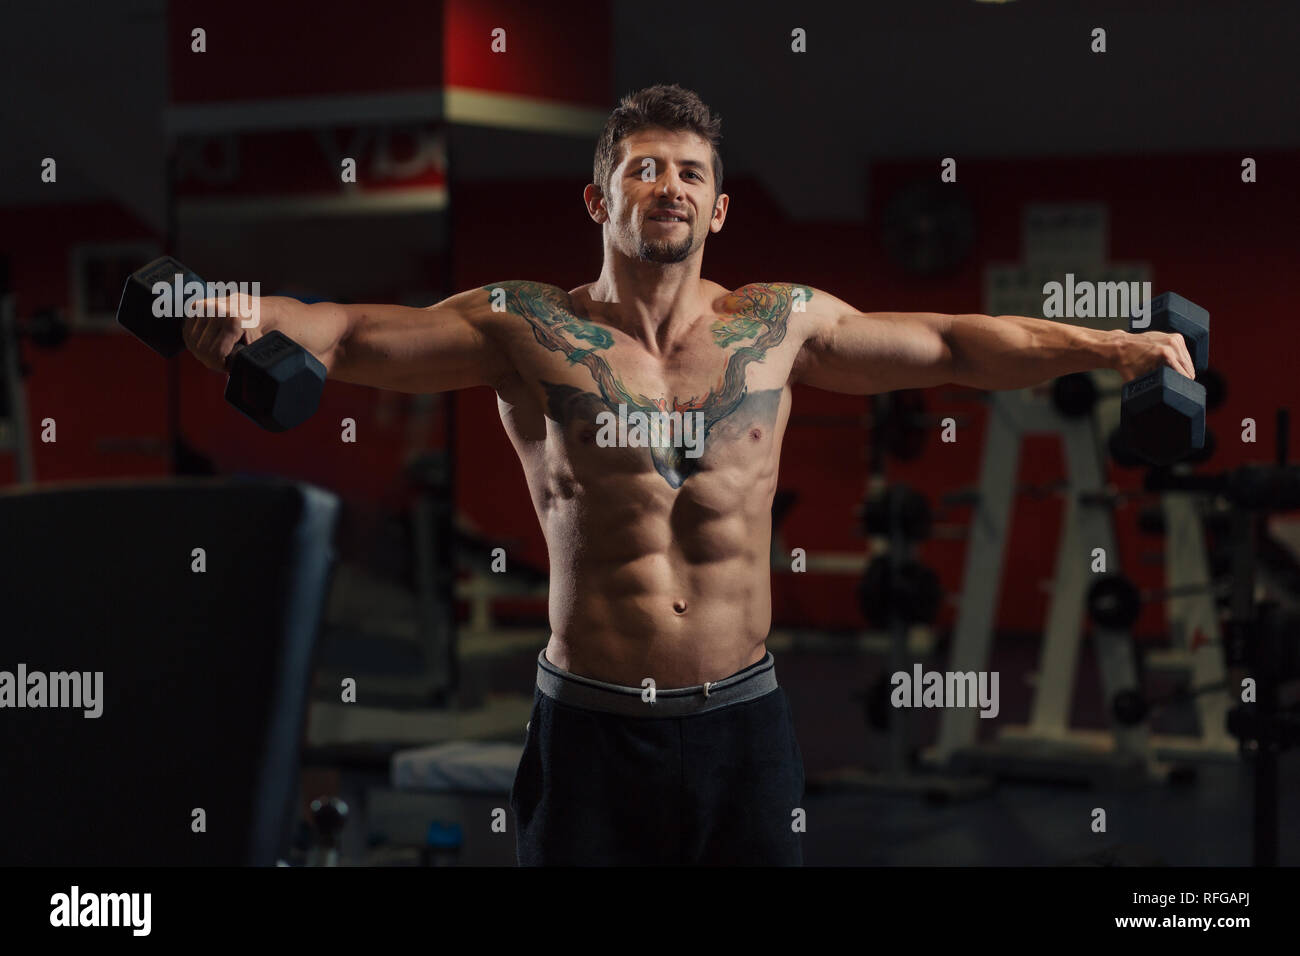 Very fit man with low body fat in the gym doing dumbbell shoulders exercise Stock Photo